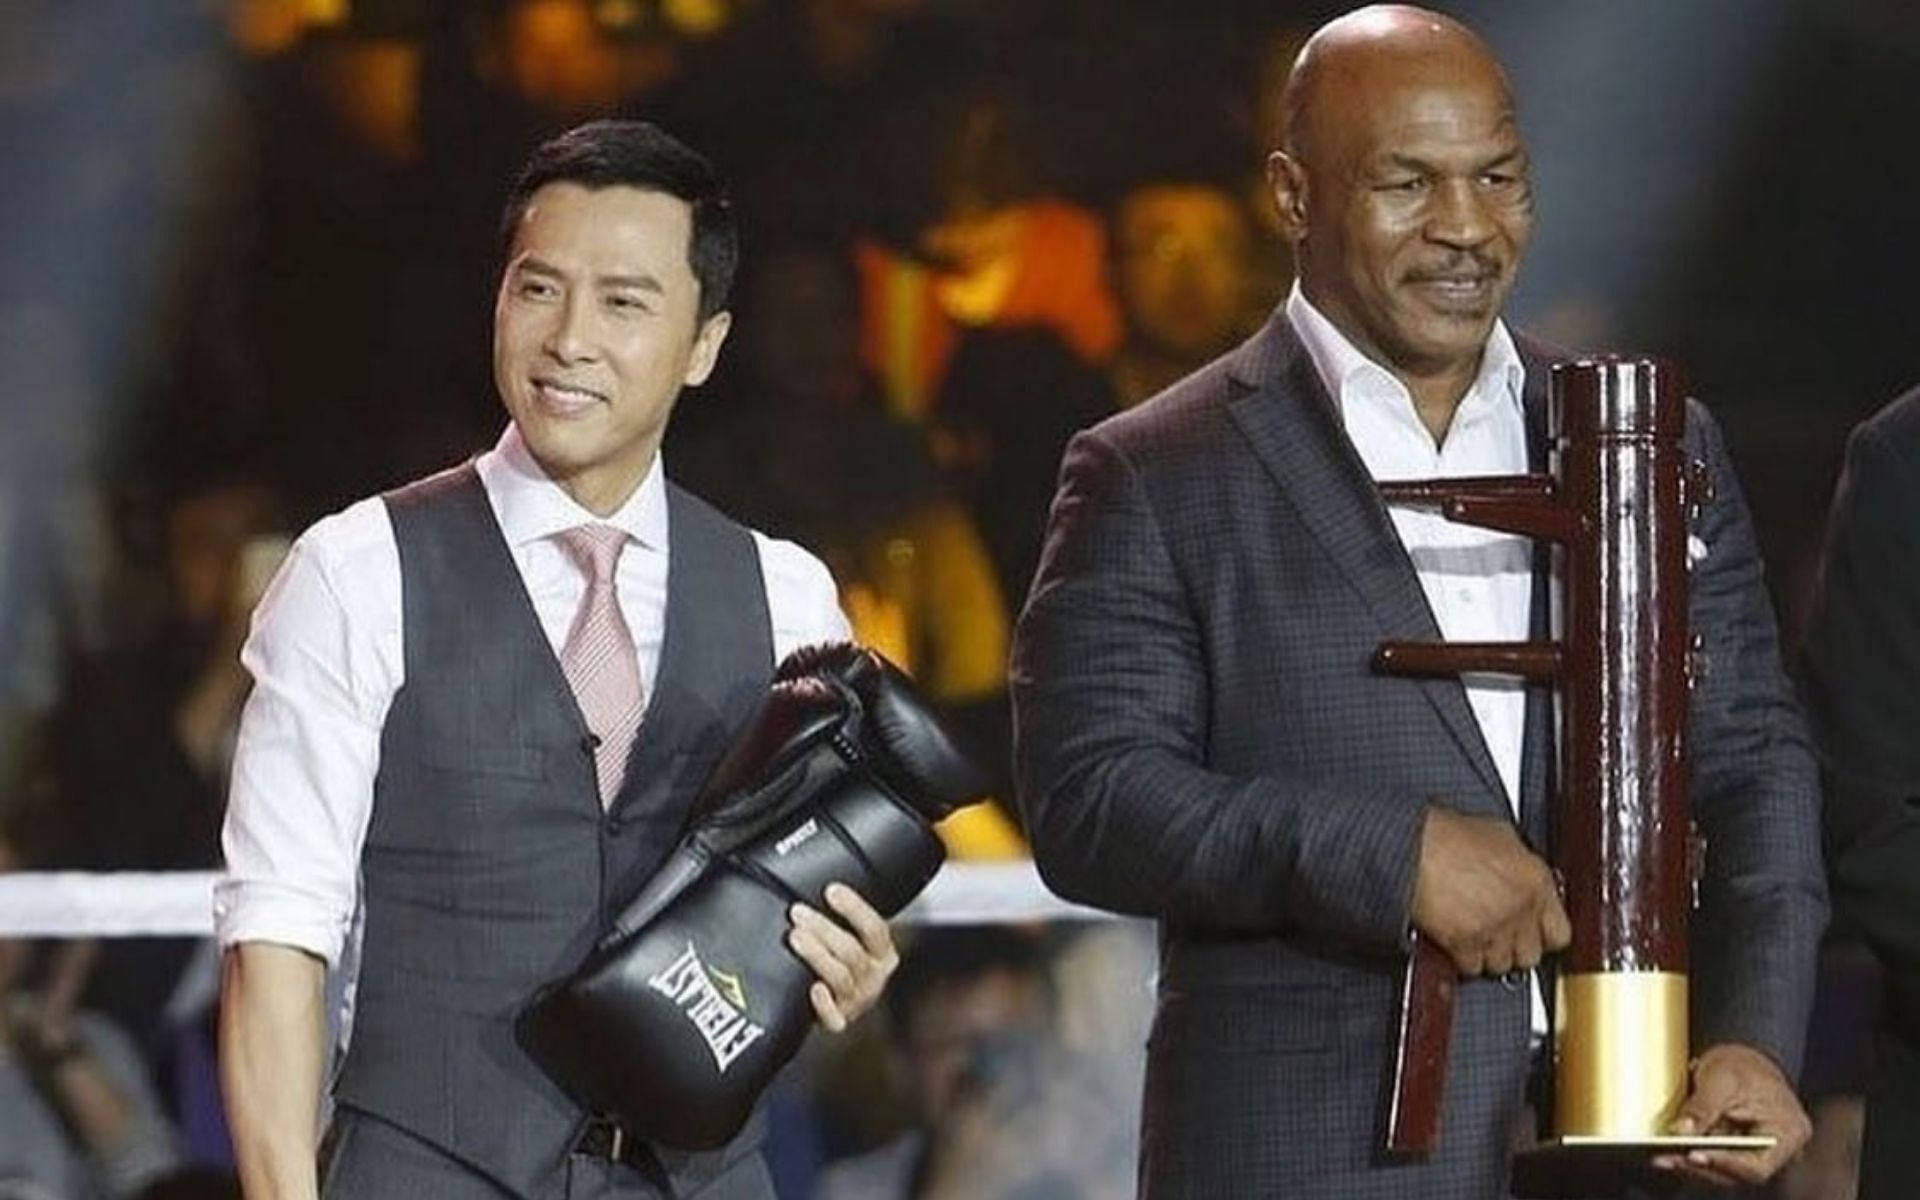 Donnie Yen (left) &amp; Mike Tyson (right) [Image Credits- @wingchunkungfuclub on Facebook]